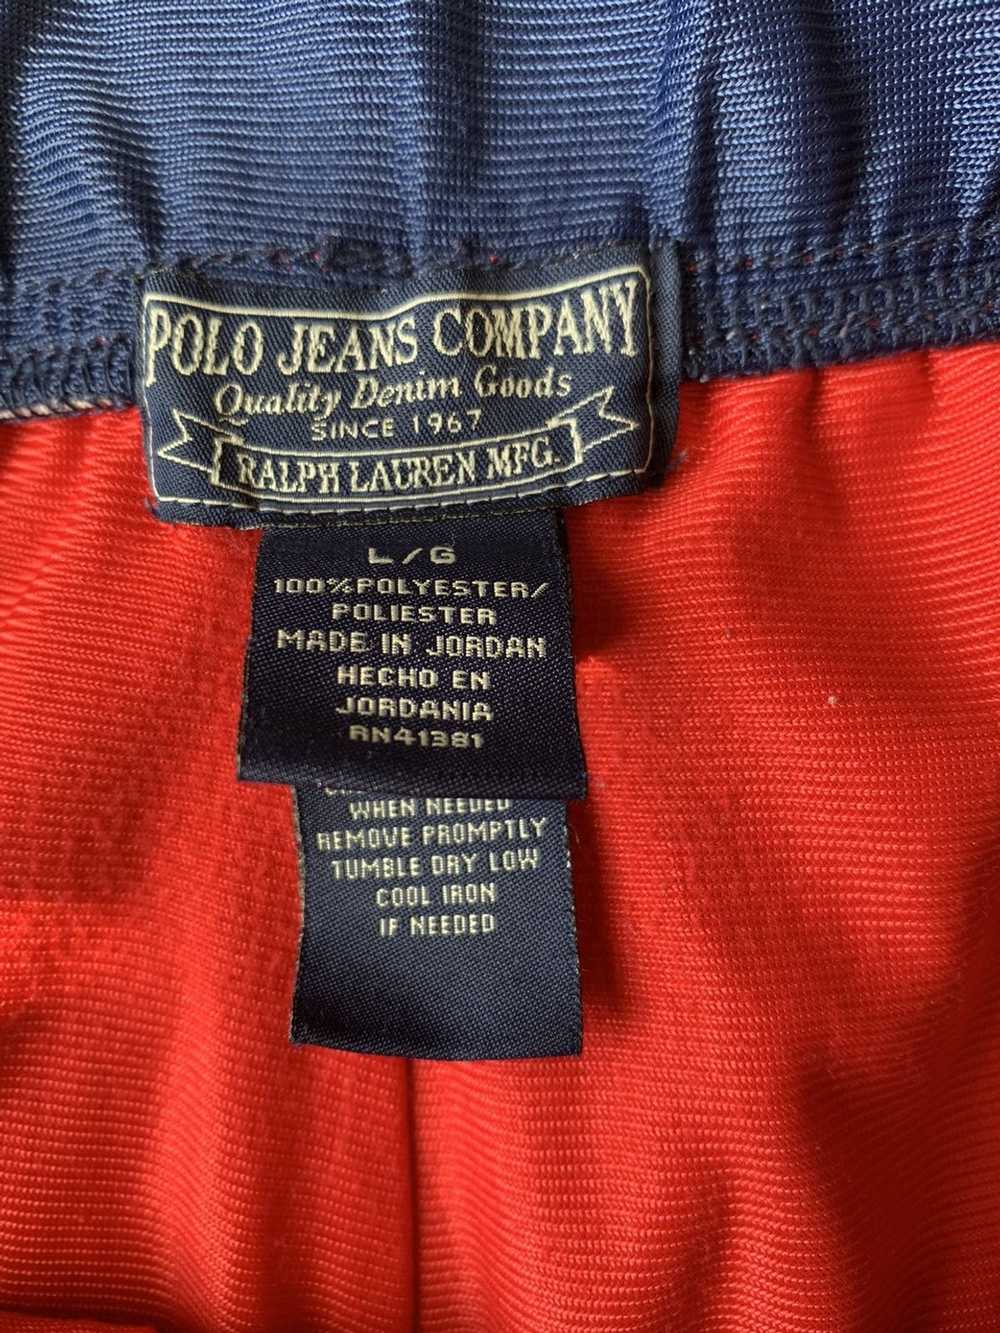 Polo Ralph Lauren × Vintage VTG Polo Jeans Co Red… - image 4